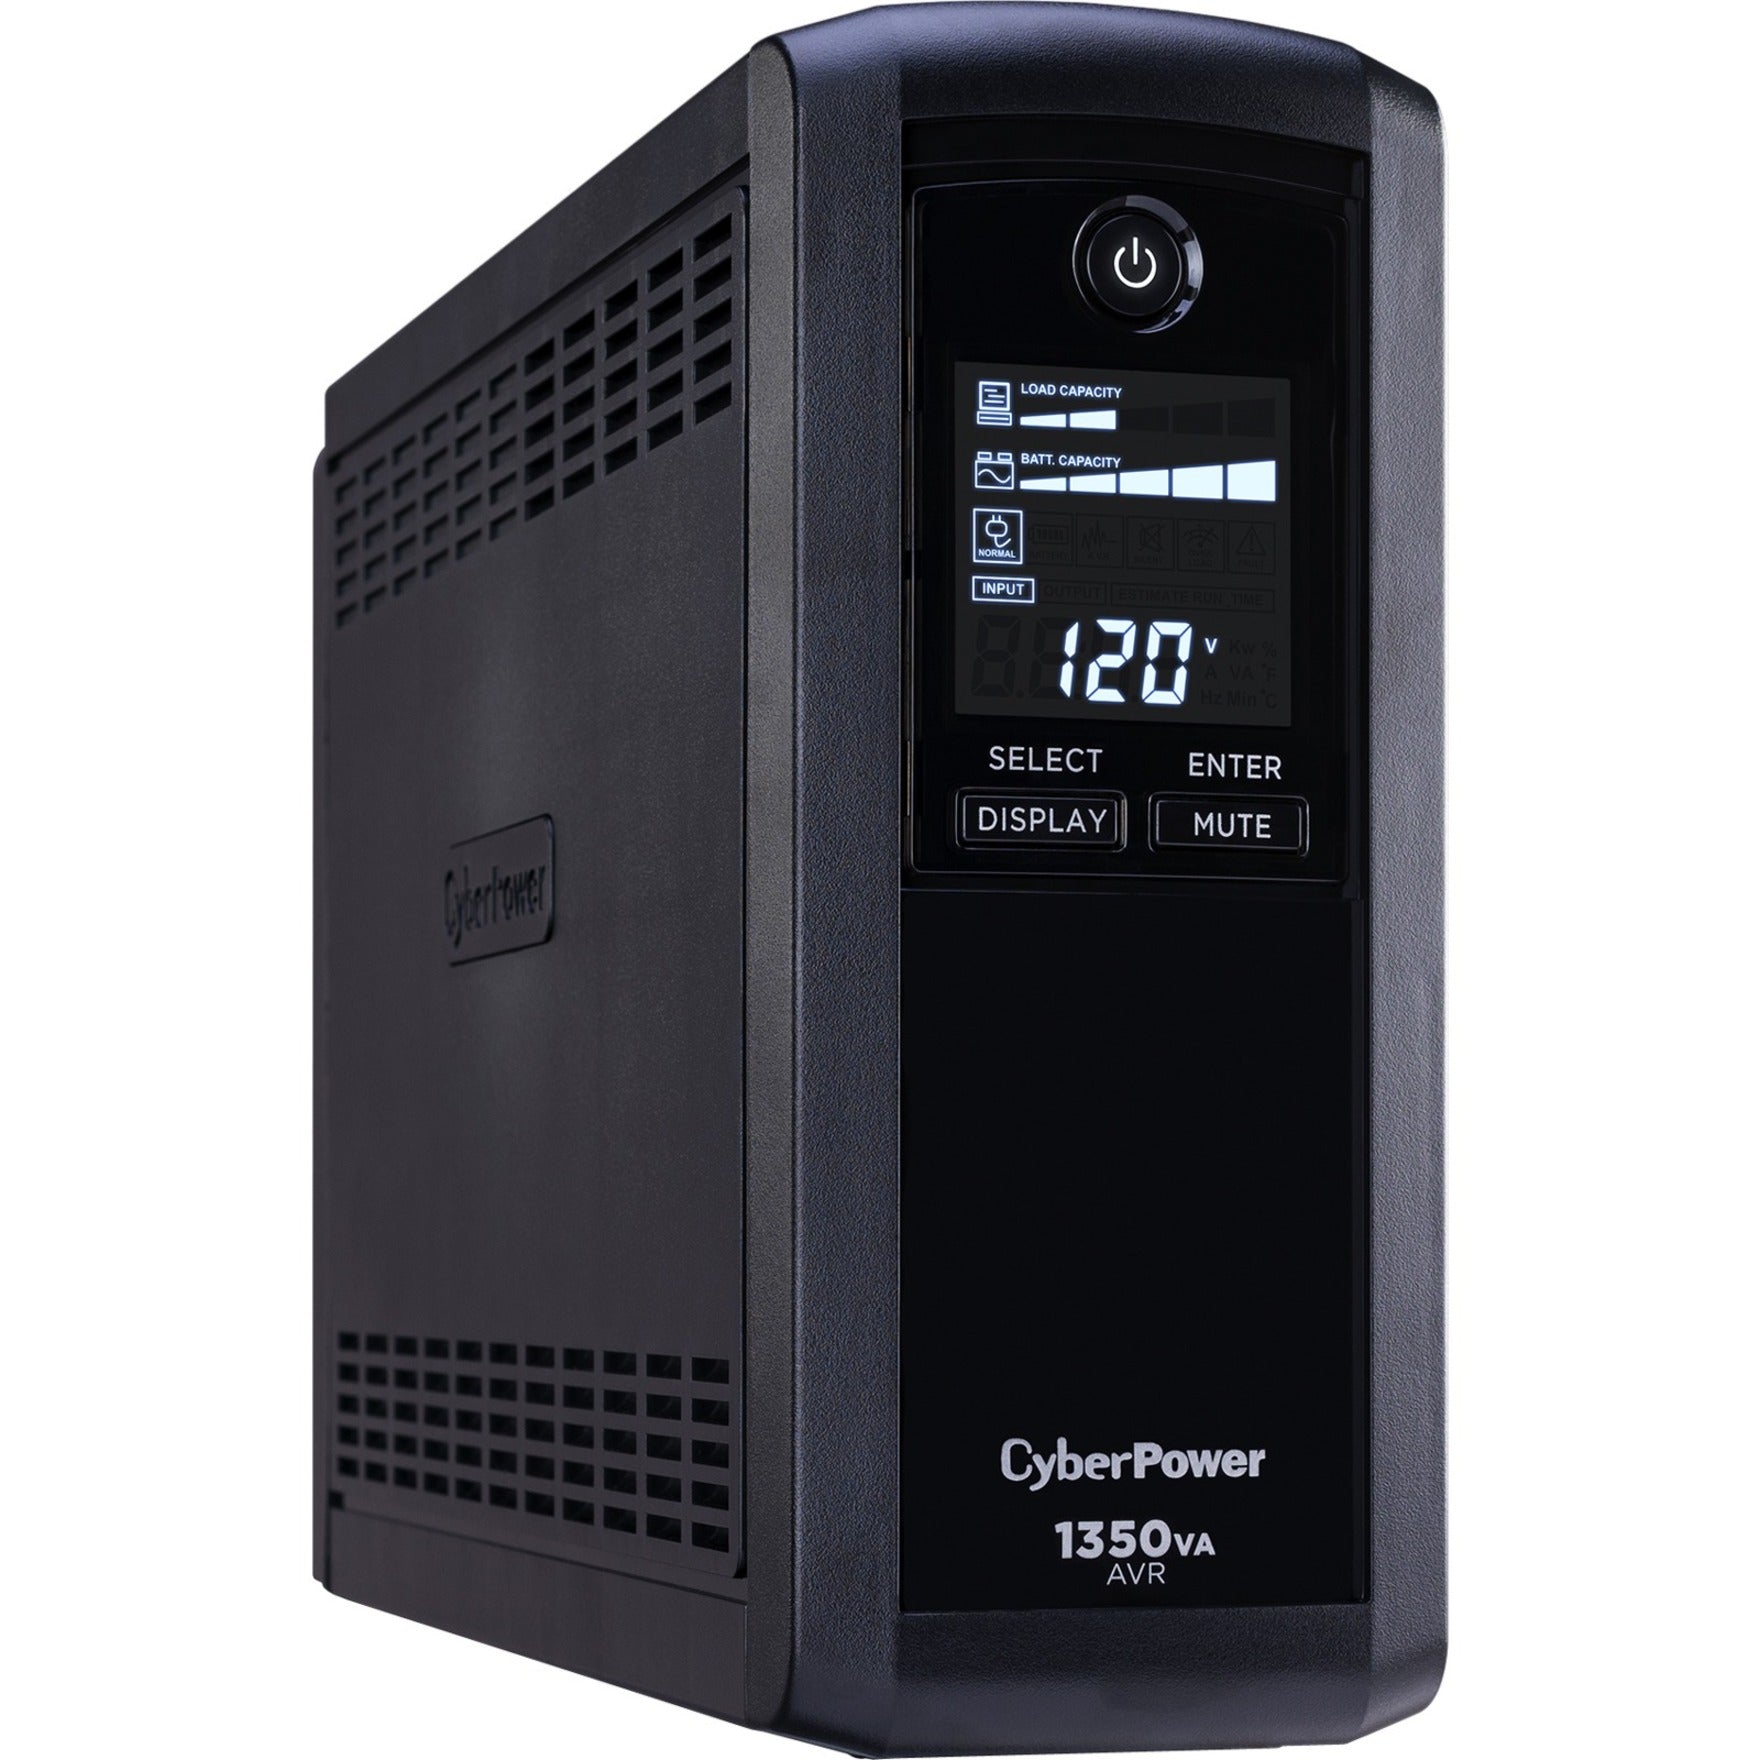 CyberPower CP1350AVRLCD Intelligent LCD UPS Systems, 1350 VA/815 W, 3 Year Warranty, Energy Star, USB and Serial Port